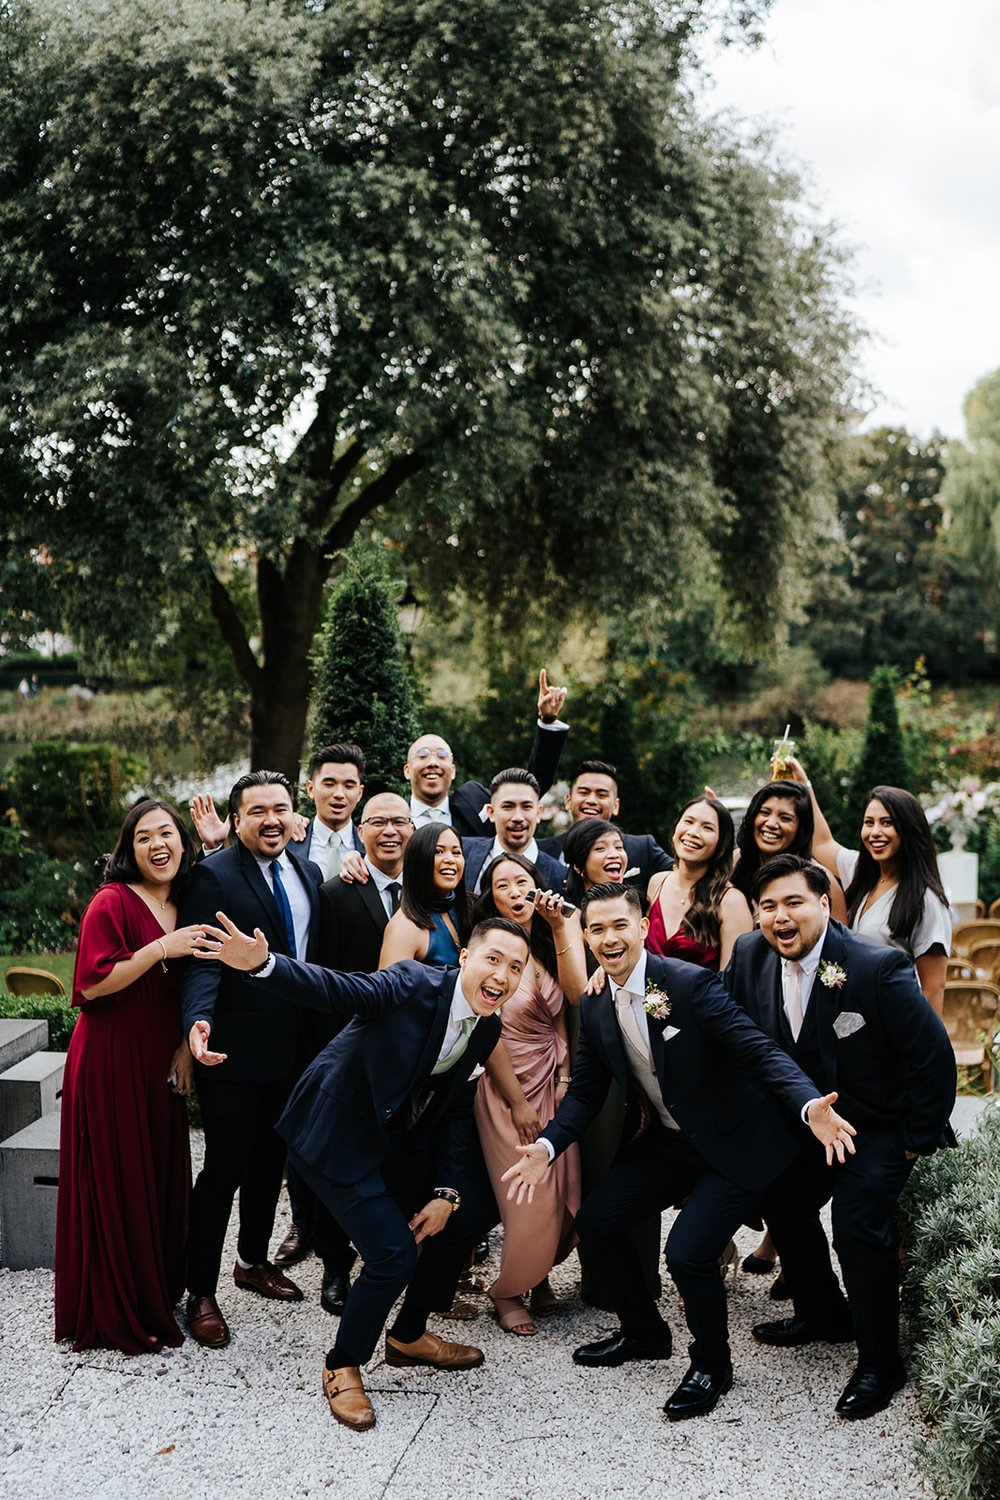 Groom and group of friends cheer for group photo with lush green foliage and thames river in the background